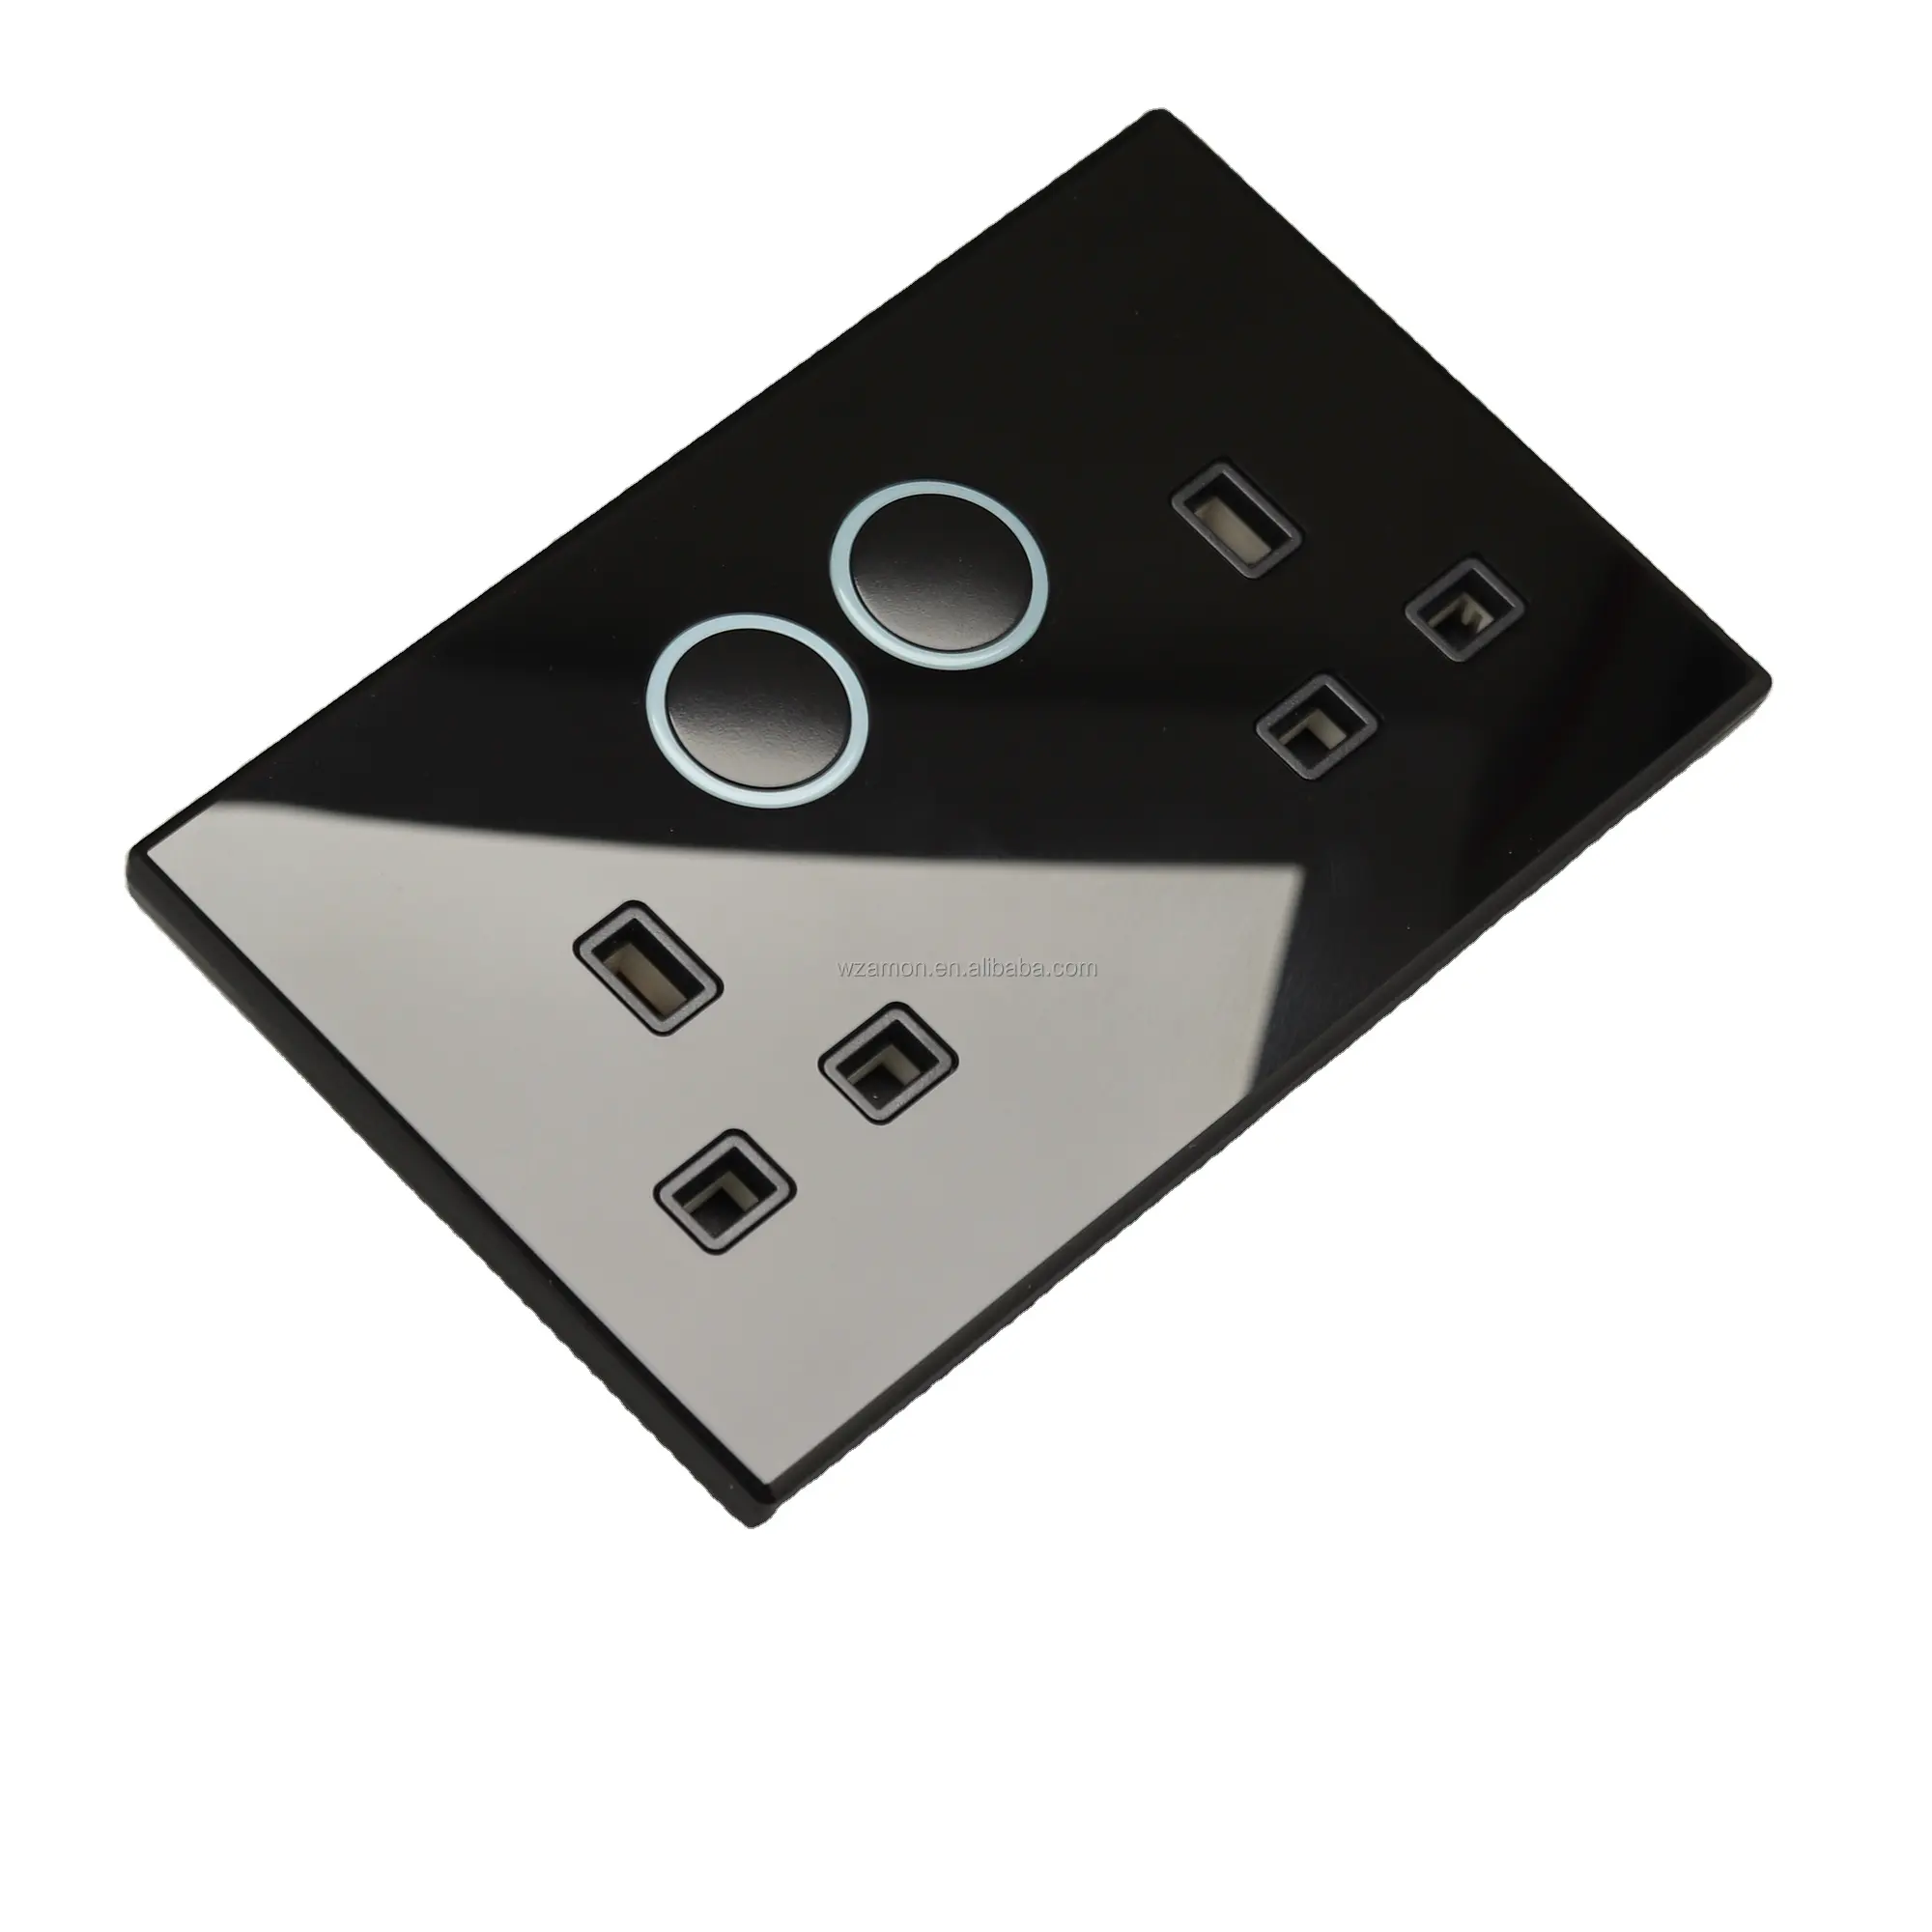 New Black Modern High Quality Power Glass Switches And Sockets Uk 13 Amp Double Wall 3 pin double socket